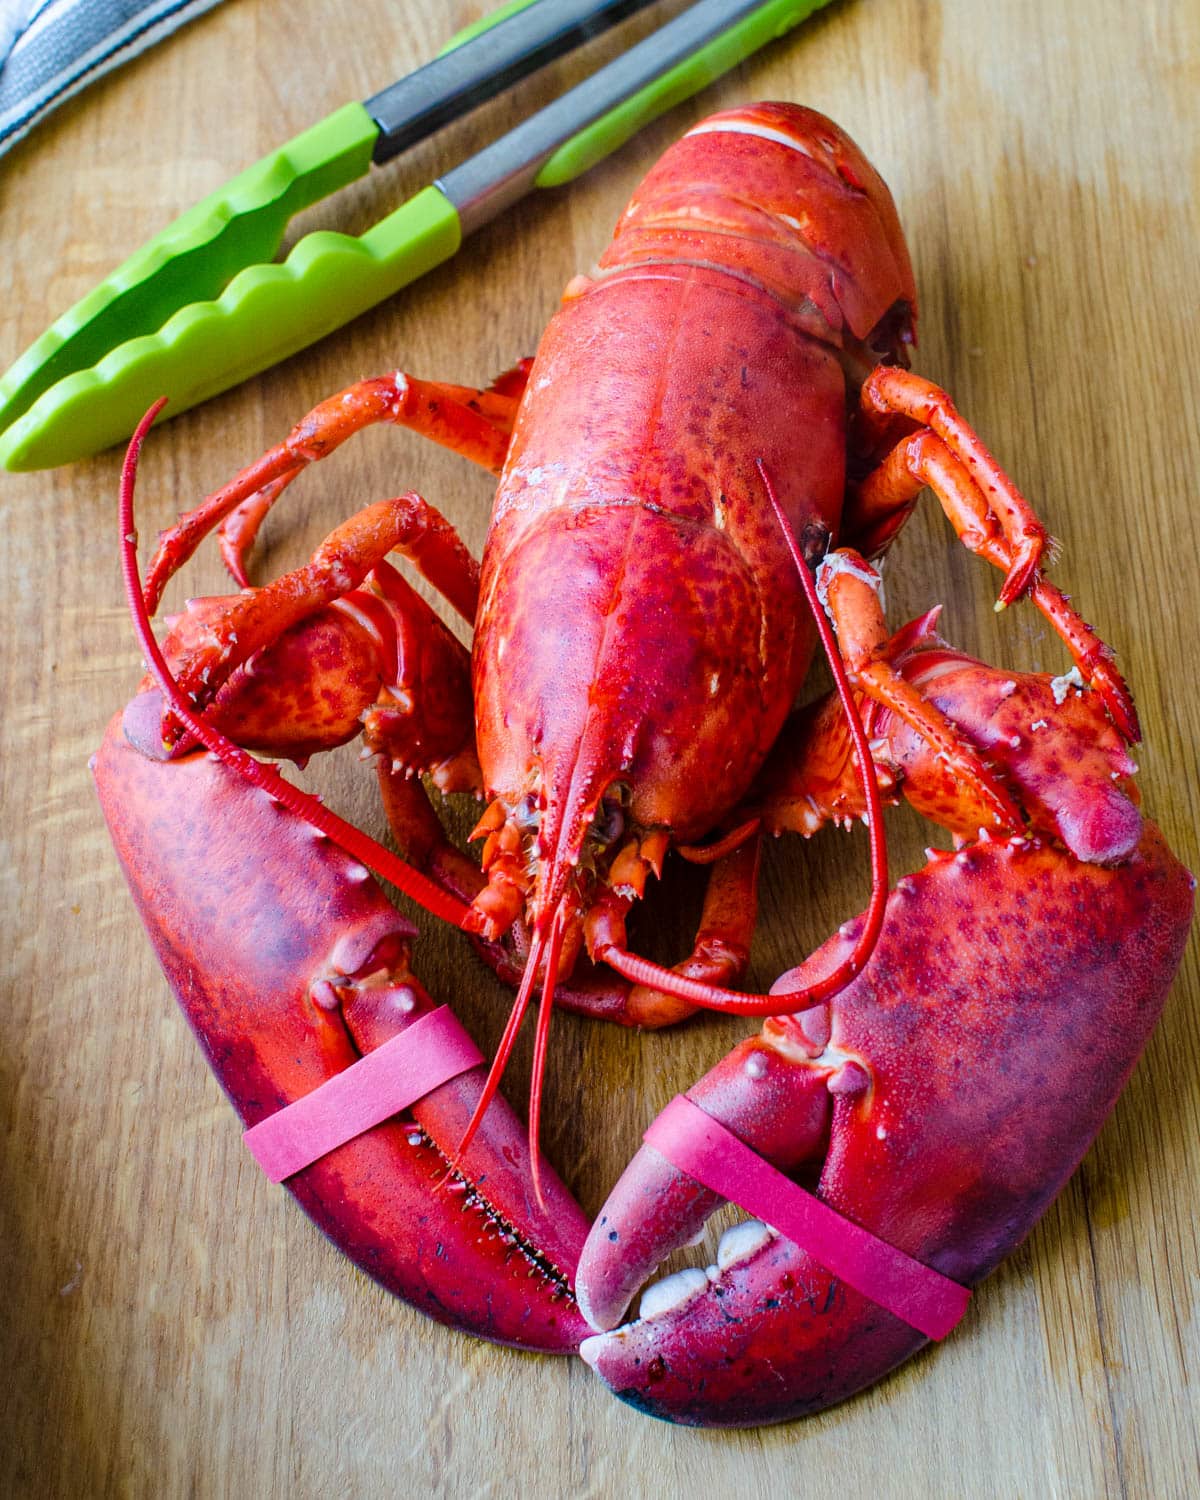 A cooked Maine lobster just plucked from the pot.